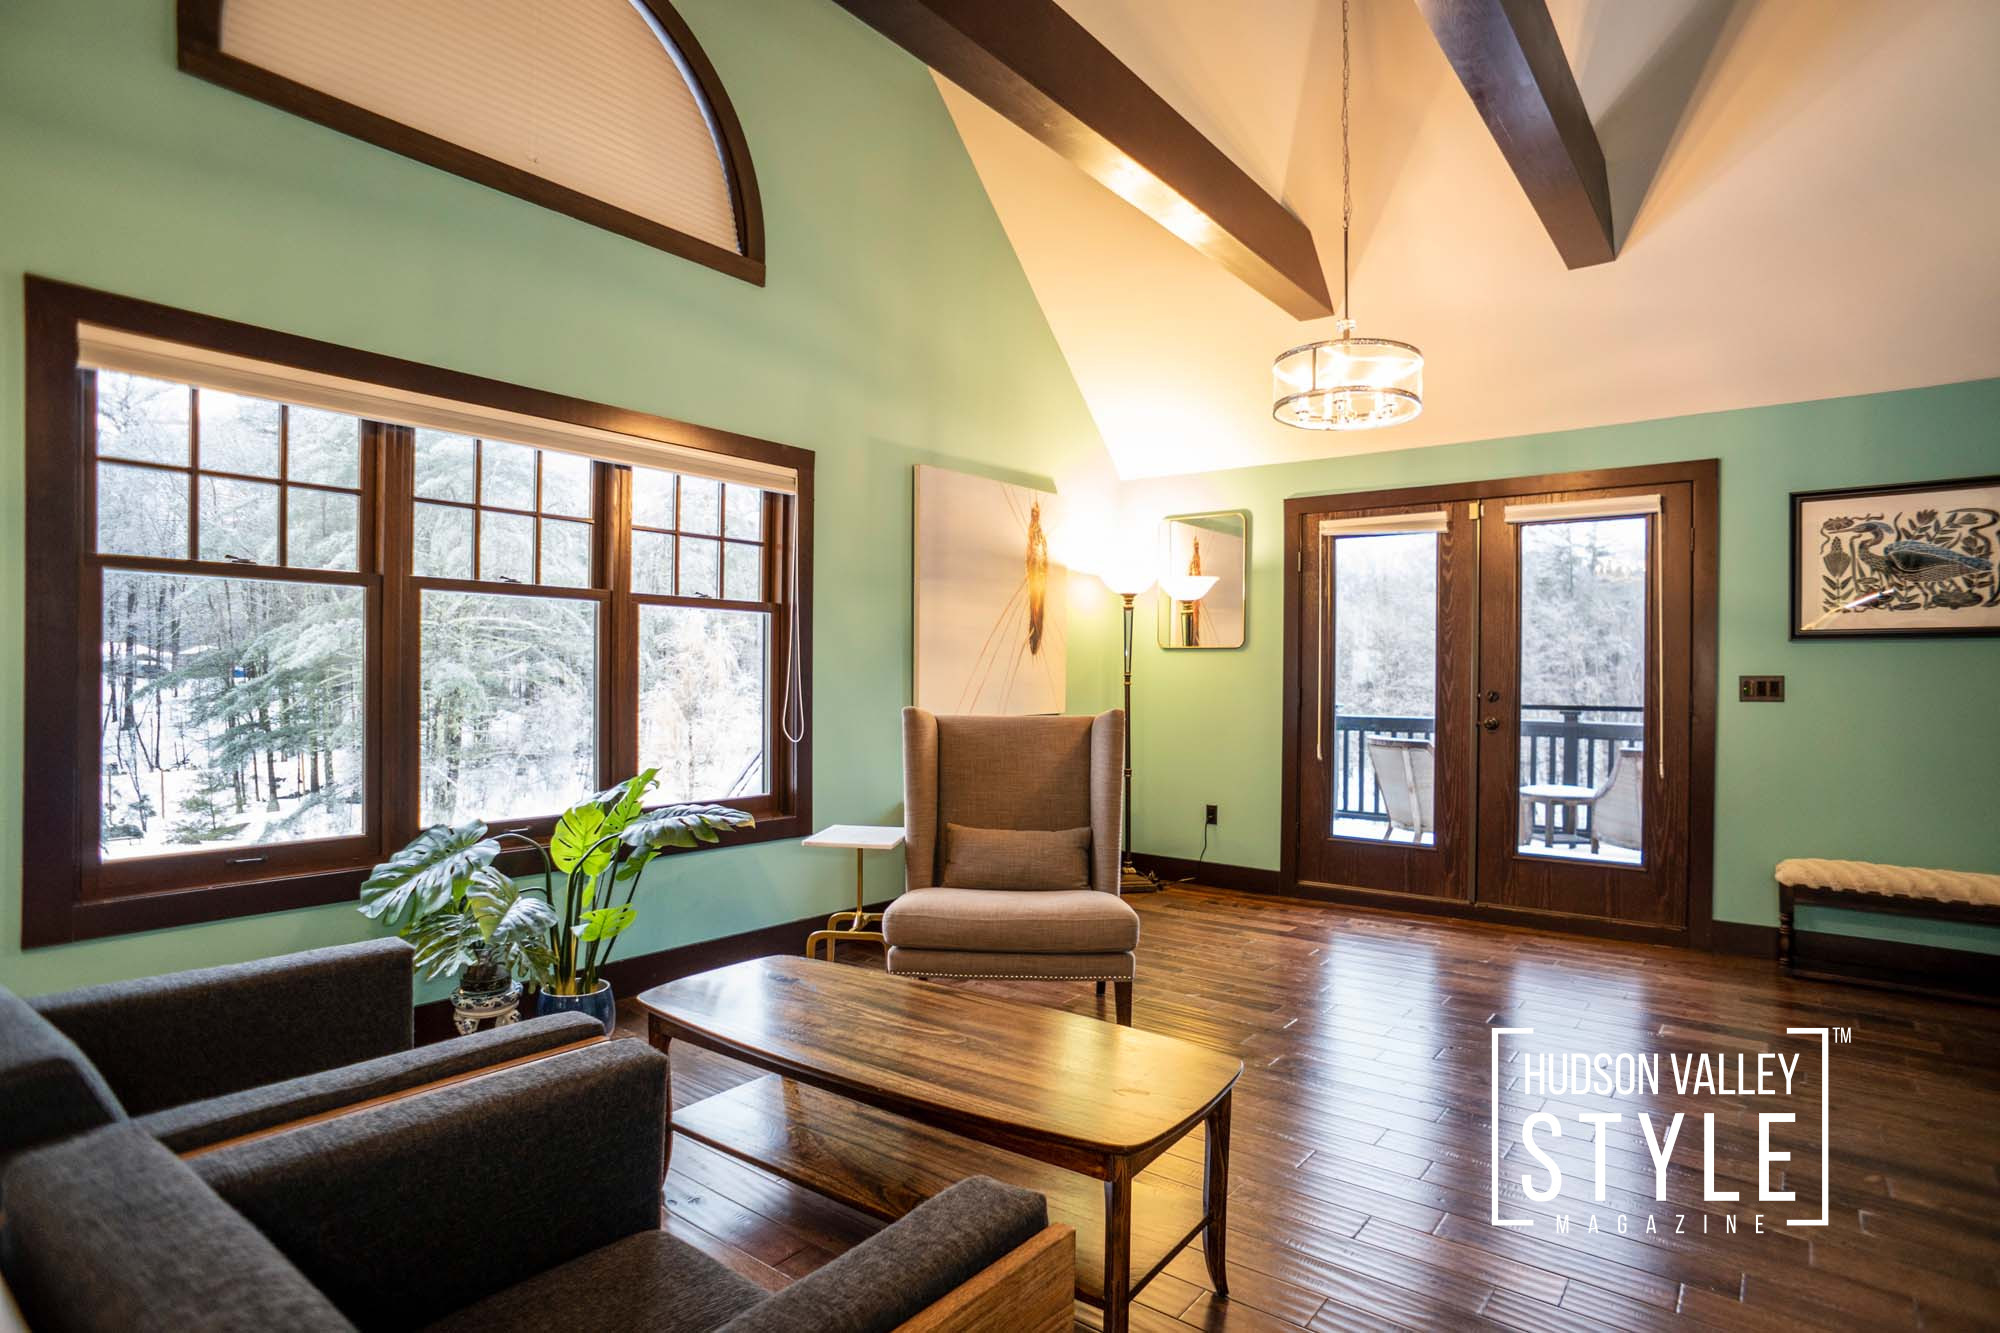 Hudson Valley Style Magazine Photo Gallery – Featured Hudson Valley Home for Sale in Catskill, NY – Real Estate Photography by Alluvion Media